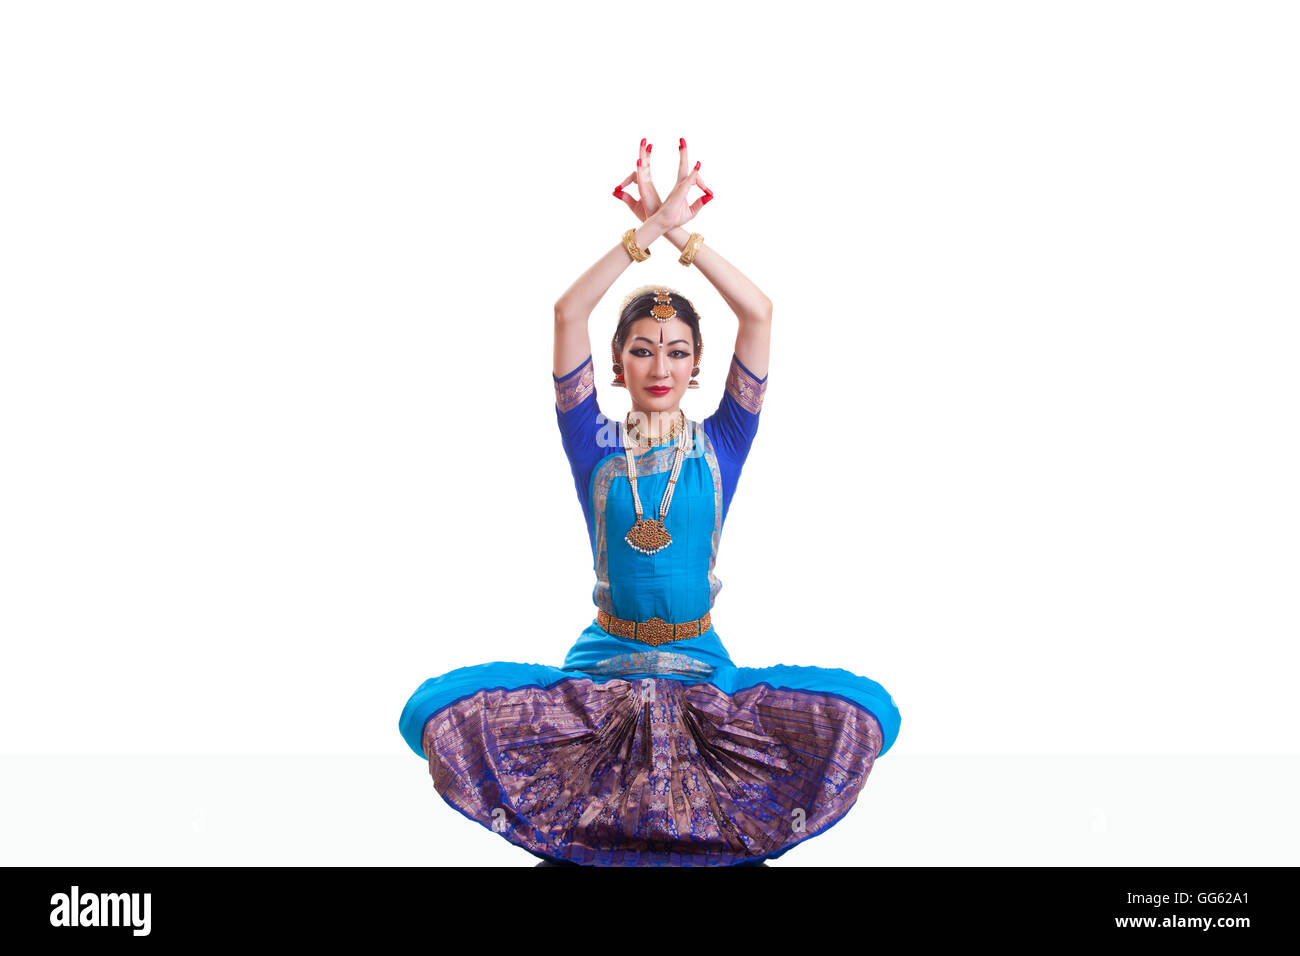 Portrait of dancer with arms raised performing Bharatanatyam isolated over white background Stock Photo